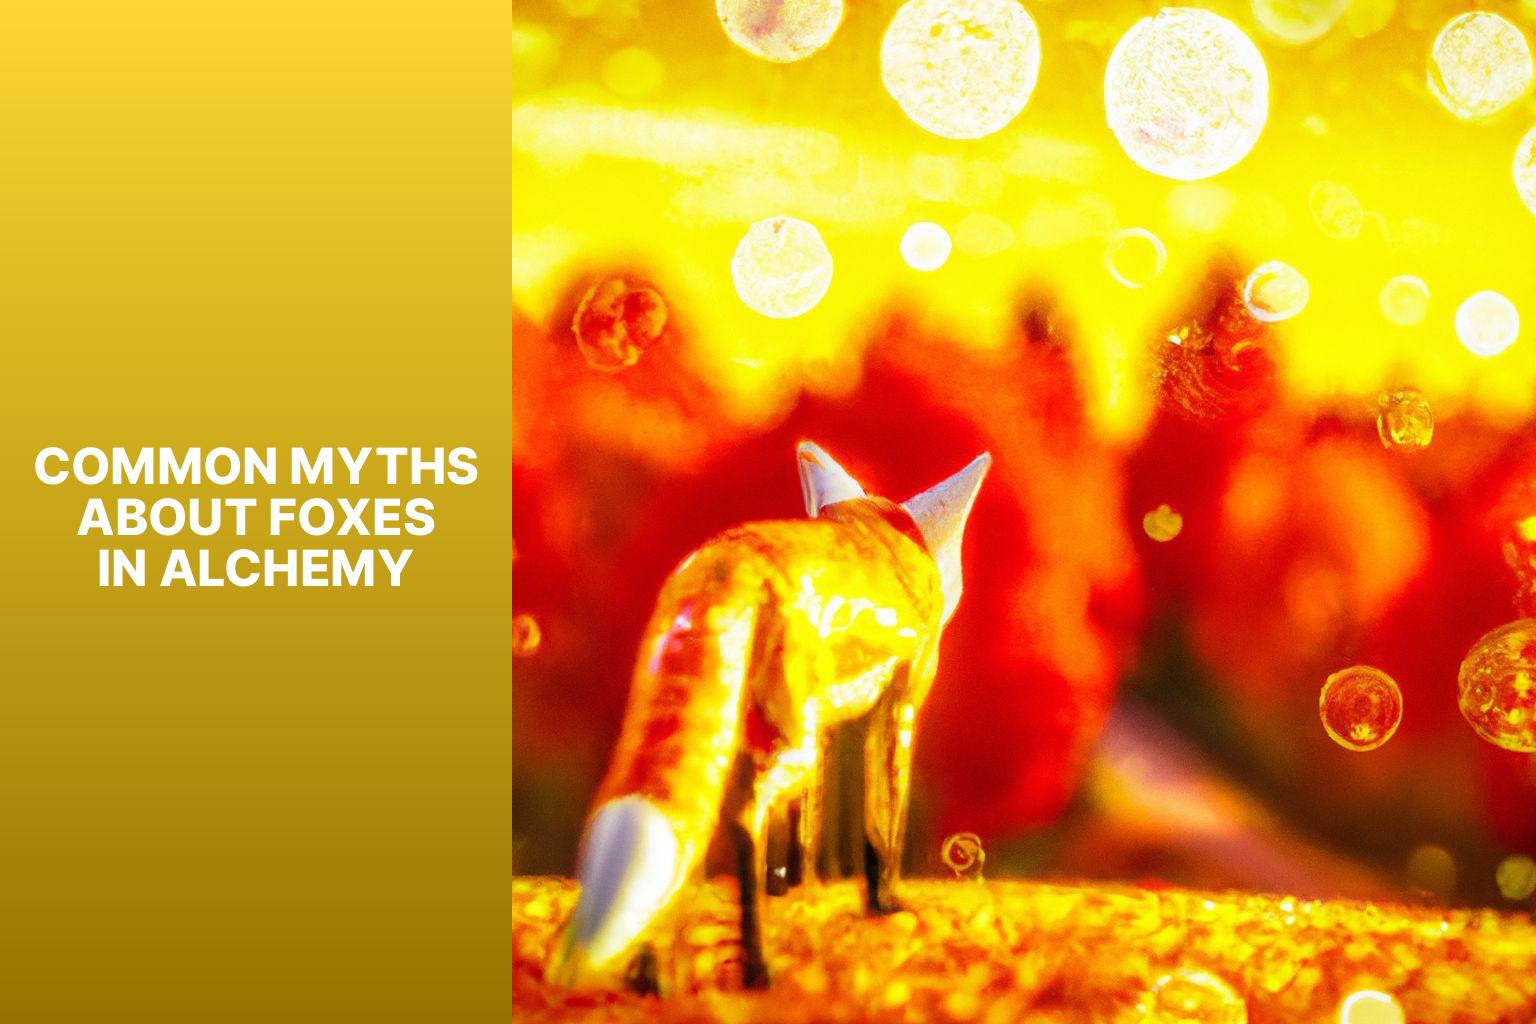 Common Myths about Foxes in Alchemy - Fox Myths in Alchemy 